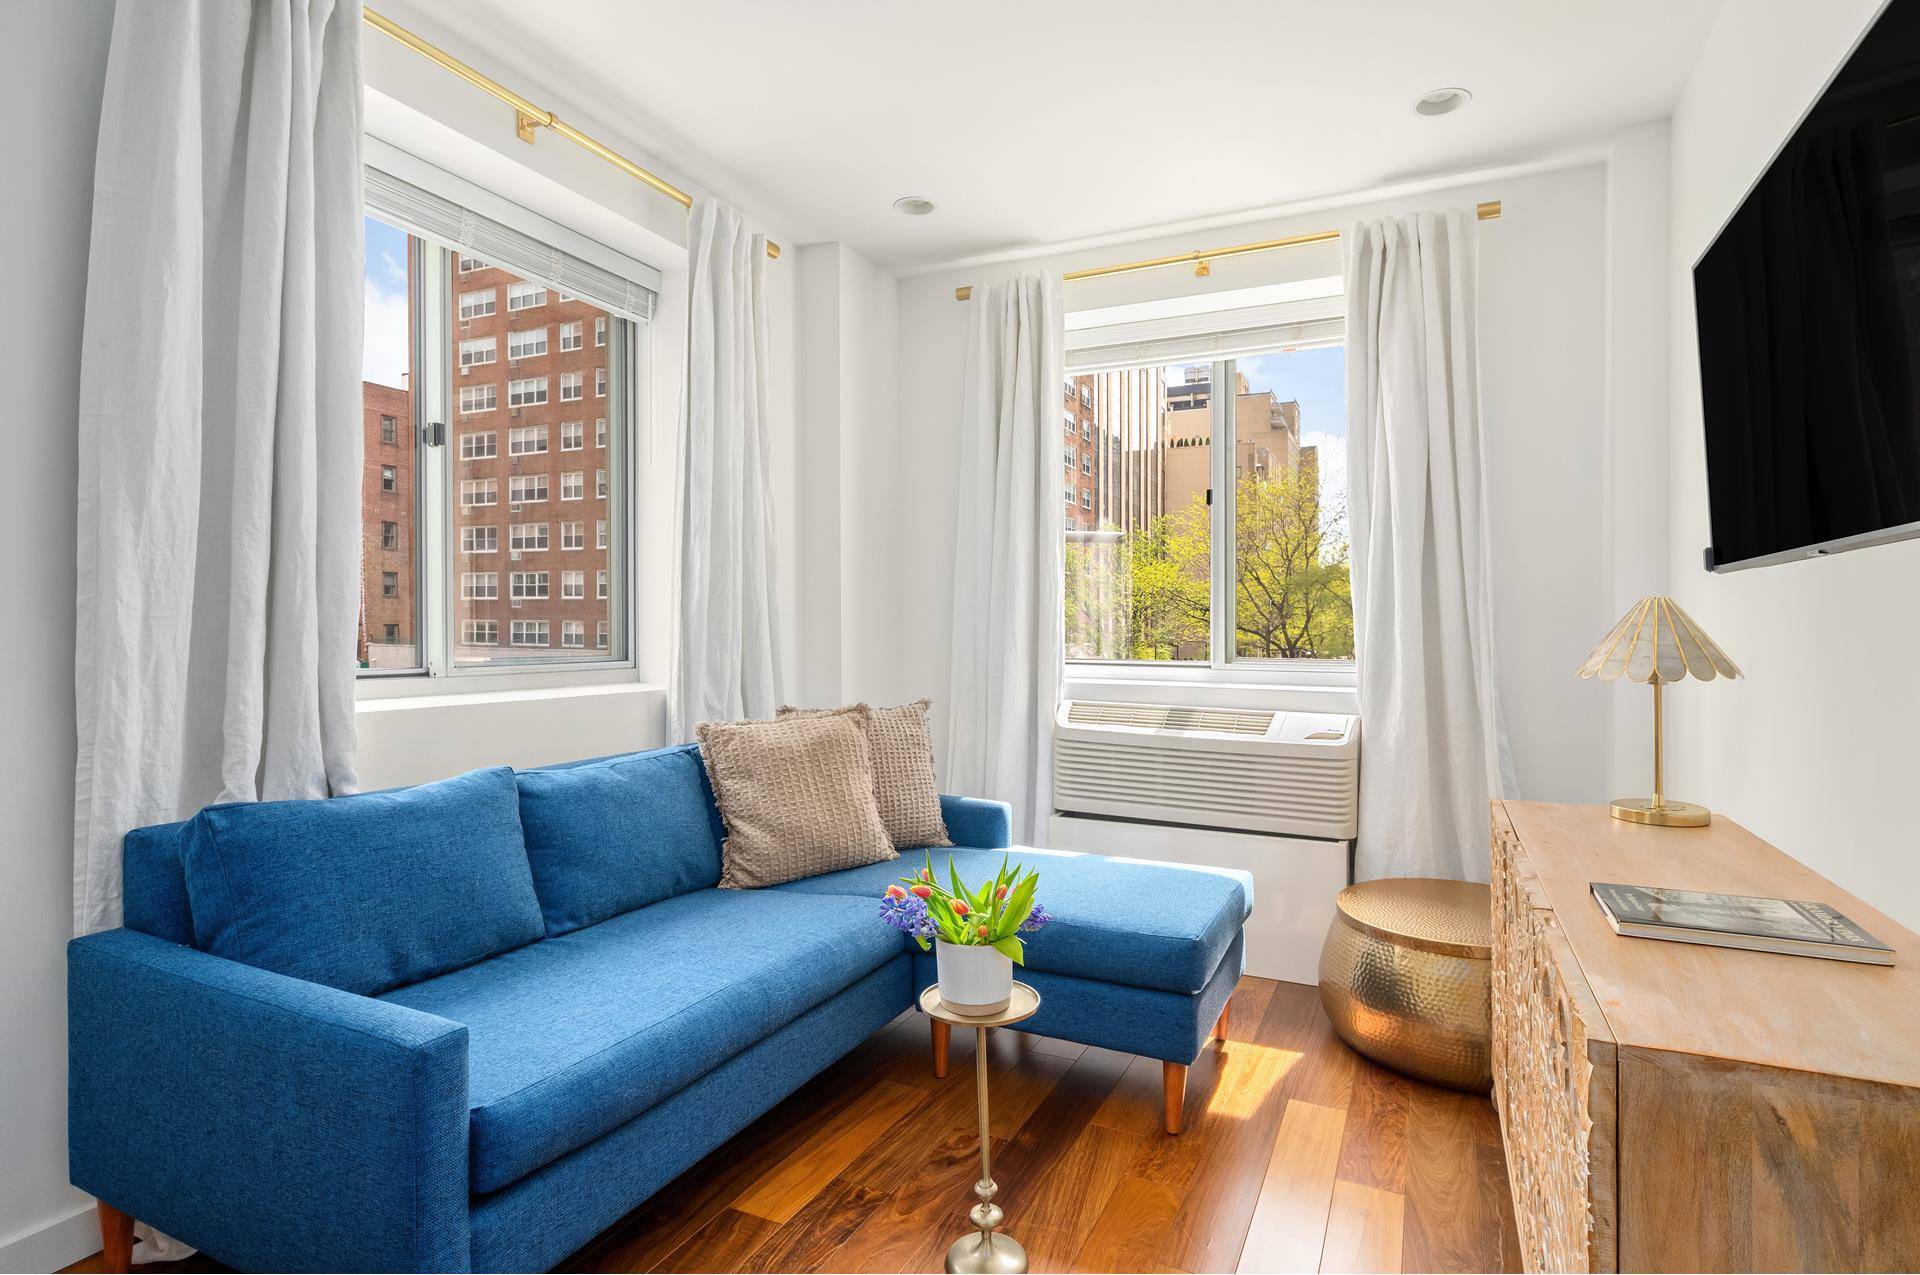 Welcome to residence 2B at 149 East 19th Street, a thoughtfully designed one bedroom corner apartment located at the end of Block Beautiful, a stunning tree lined stretch of landmarked ...